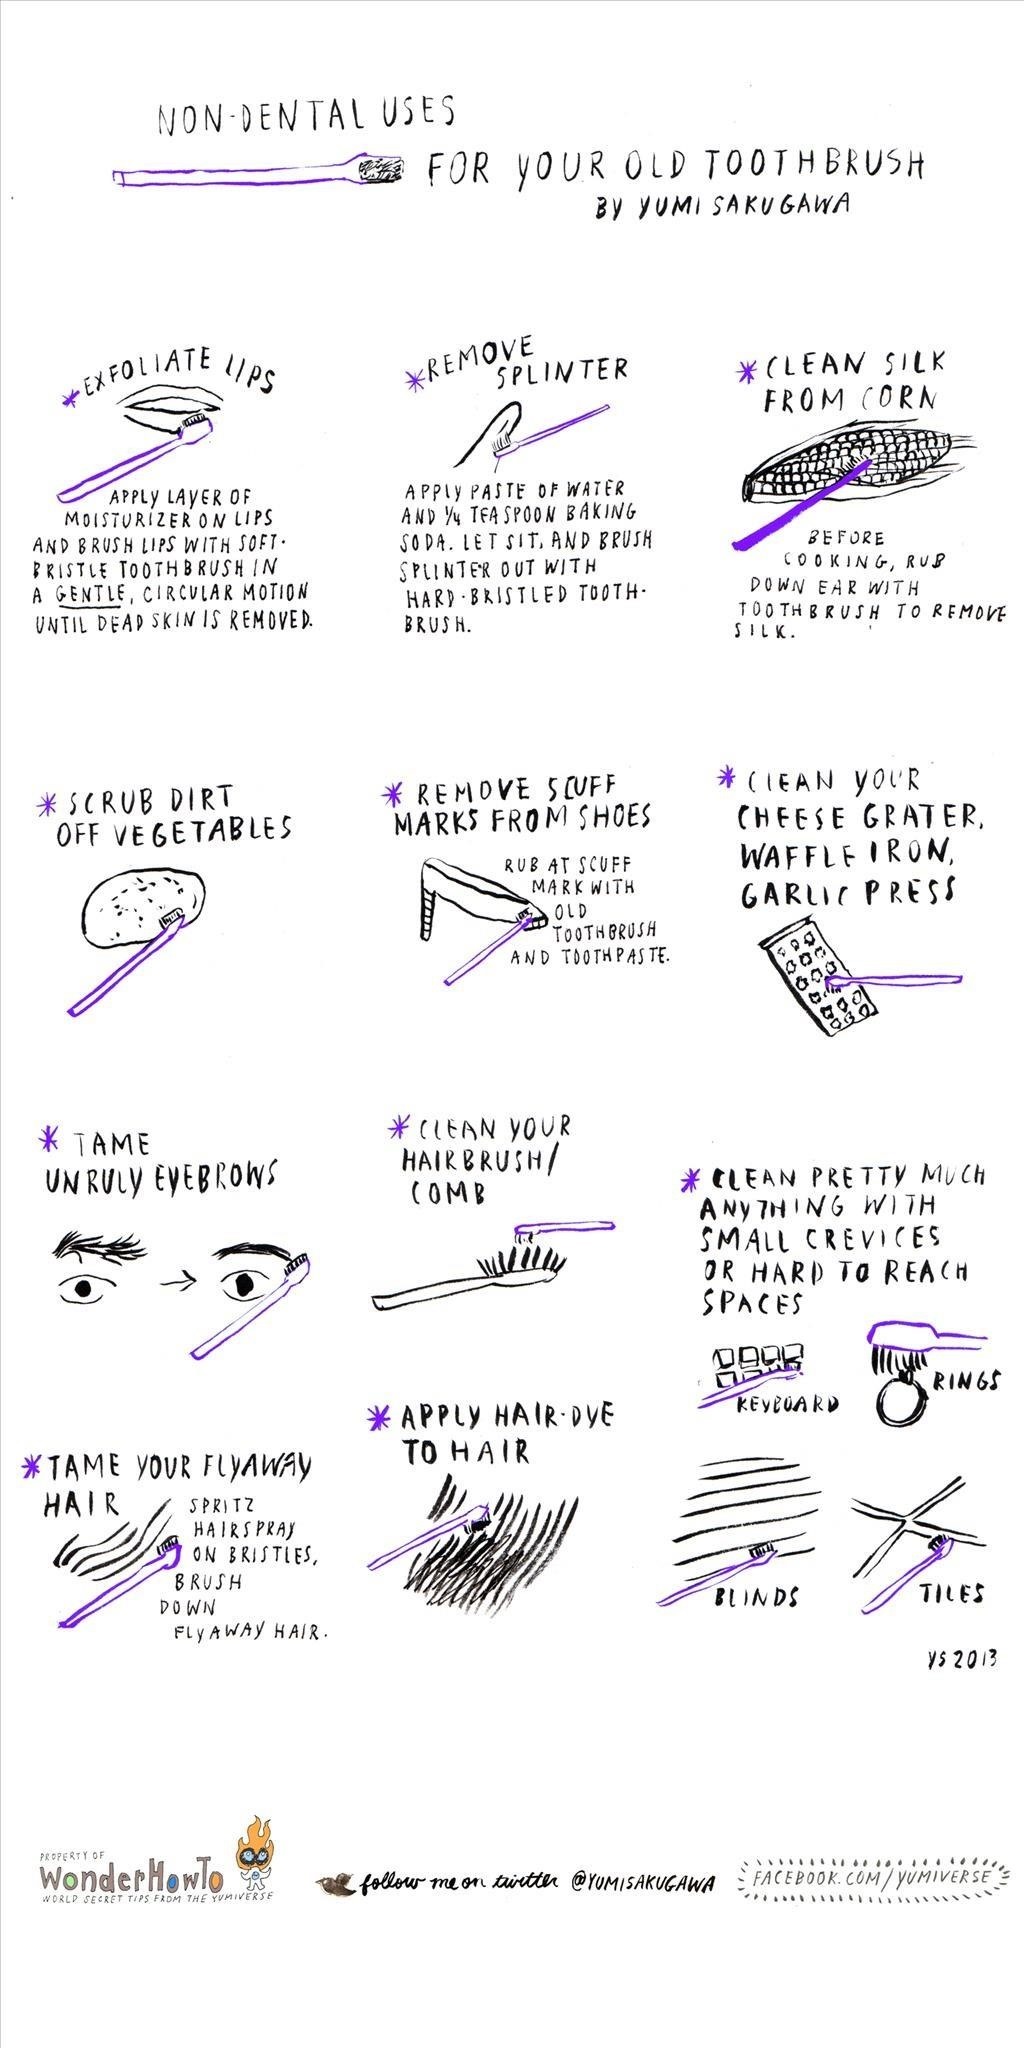 11 Non-Dental Uses for Your Old Toothbrush